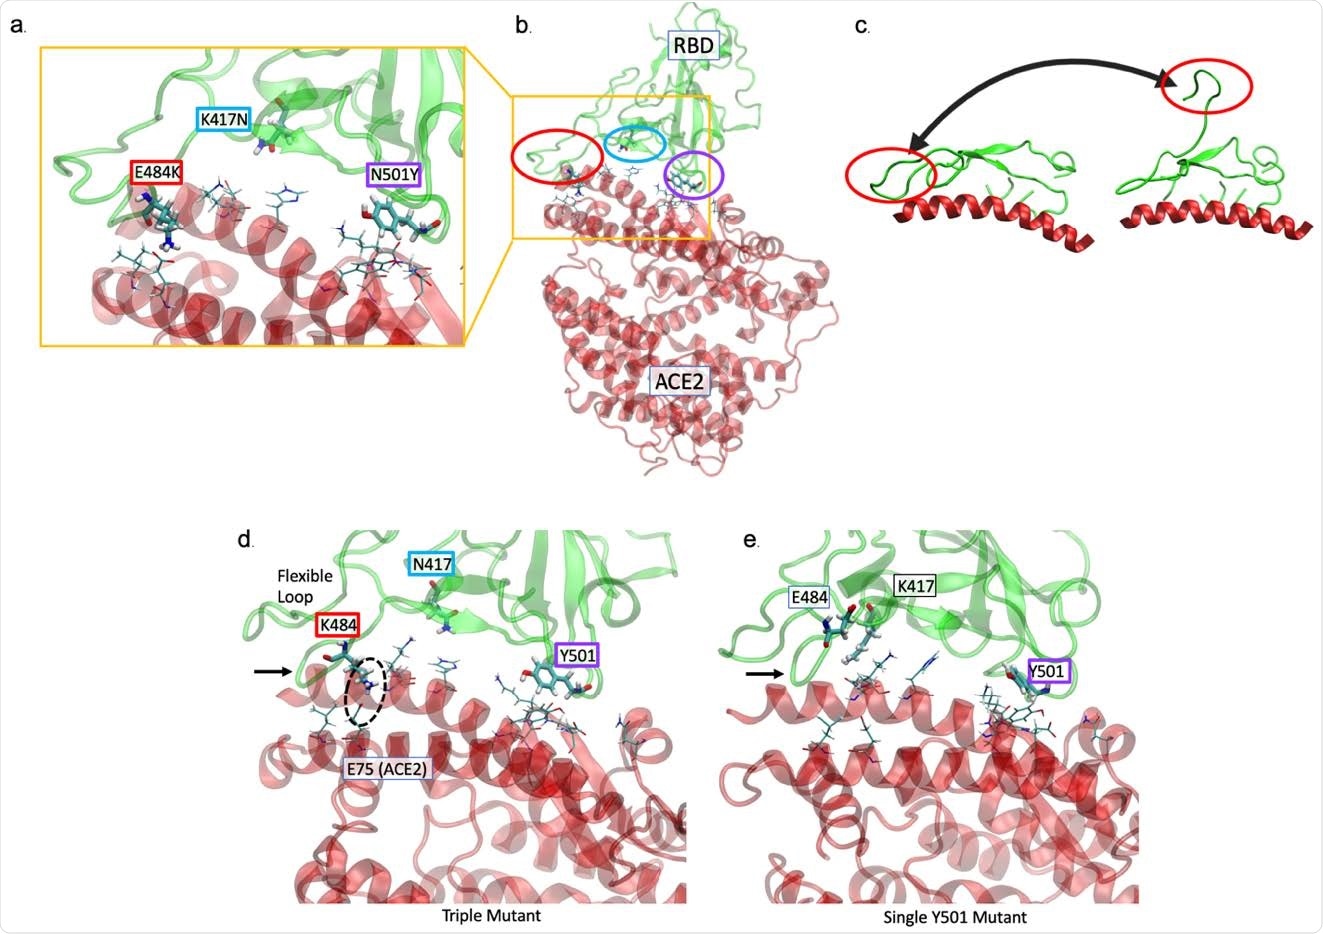 The K484 substitution in the novel South African variant increases affinity of the spike receptor binding domain (S RBD) for ACE2. (a, b) The positions of the E484K (red), K417N (cyan), and N501K (purple) substitutions at the interface of the 501Y.V2 variant S RBD - hACE2 interface are shown. hACE2 residues nearest to the mutated RBD residues are rendered as thin sticks. The E484K mutation is located in a highly flexible loop region of the interface, K417N in a region with lower probability of contact, and N501K at a second point of high-affinity contact. (c) The range of movement available to the loop containing residue 484 is shown by PCA of MD simulation of a first-wave sequence11,13. (d) MD simulation performed in the presence of all 3 substitutions reveals the loop region is tightly associated (black arrow) with hACE2. A key contact ion pair is circled. (e) In comparison to K484, when E484 (‘wildtype’) is present with only the Y501 variant, the loop is not as tightly associated (arrow).